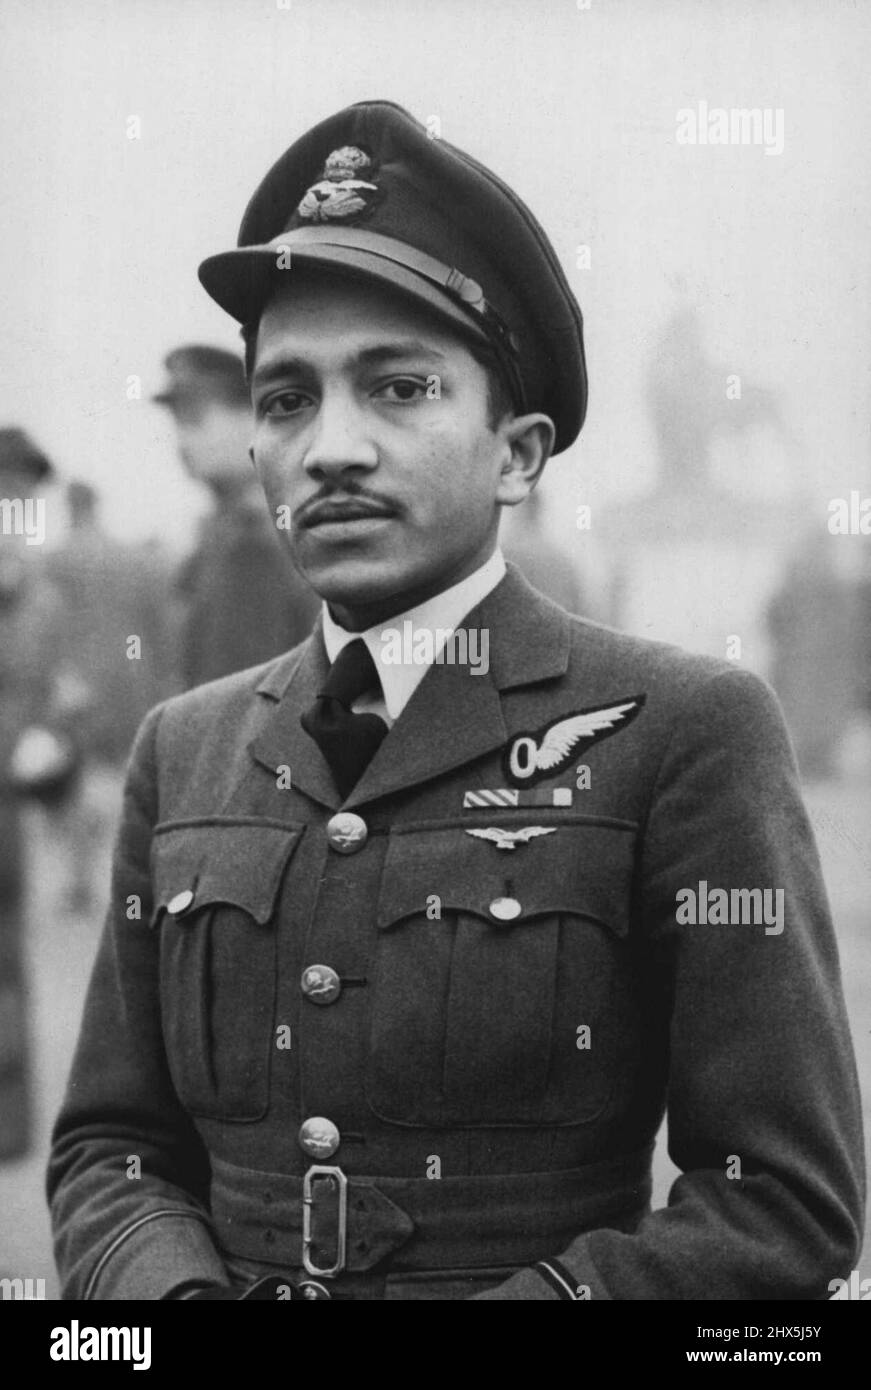 At A Recent Investiture Held by H.M. the Queen -- The Queen deputised for the King at a recent Investiture, on account of His Majesty's indisposition with a attack of influenza. Flying officer S.E. Sukthanker who has made 45 Pathfinder missions over enemy Europe, is the first Indian in the R.A.F. to be decorated with the D.F.C. he received this award from Her Majesty the Queen. December 9, 1943. Stock Photo